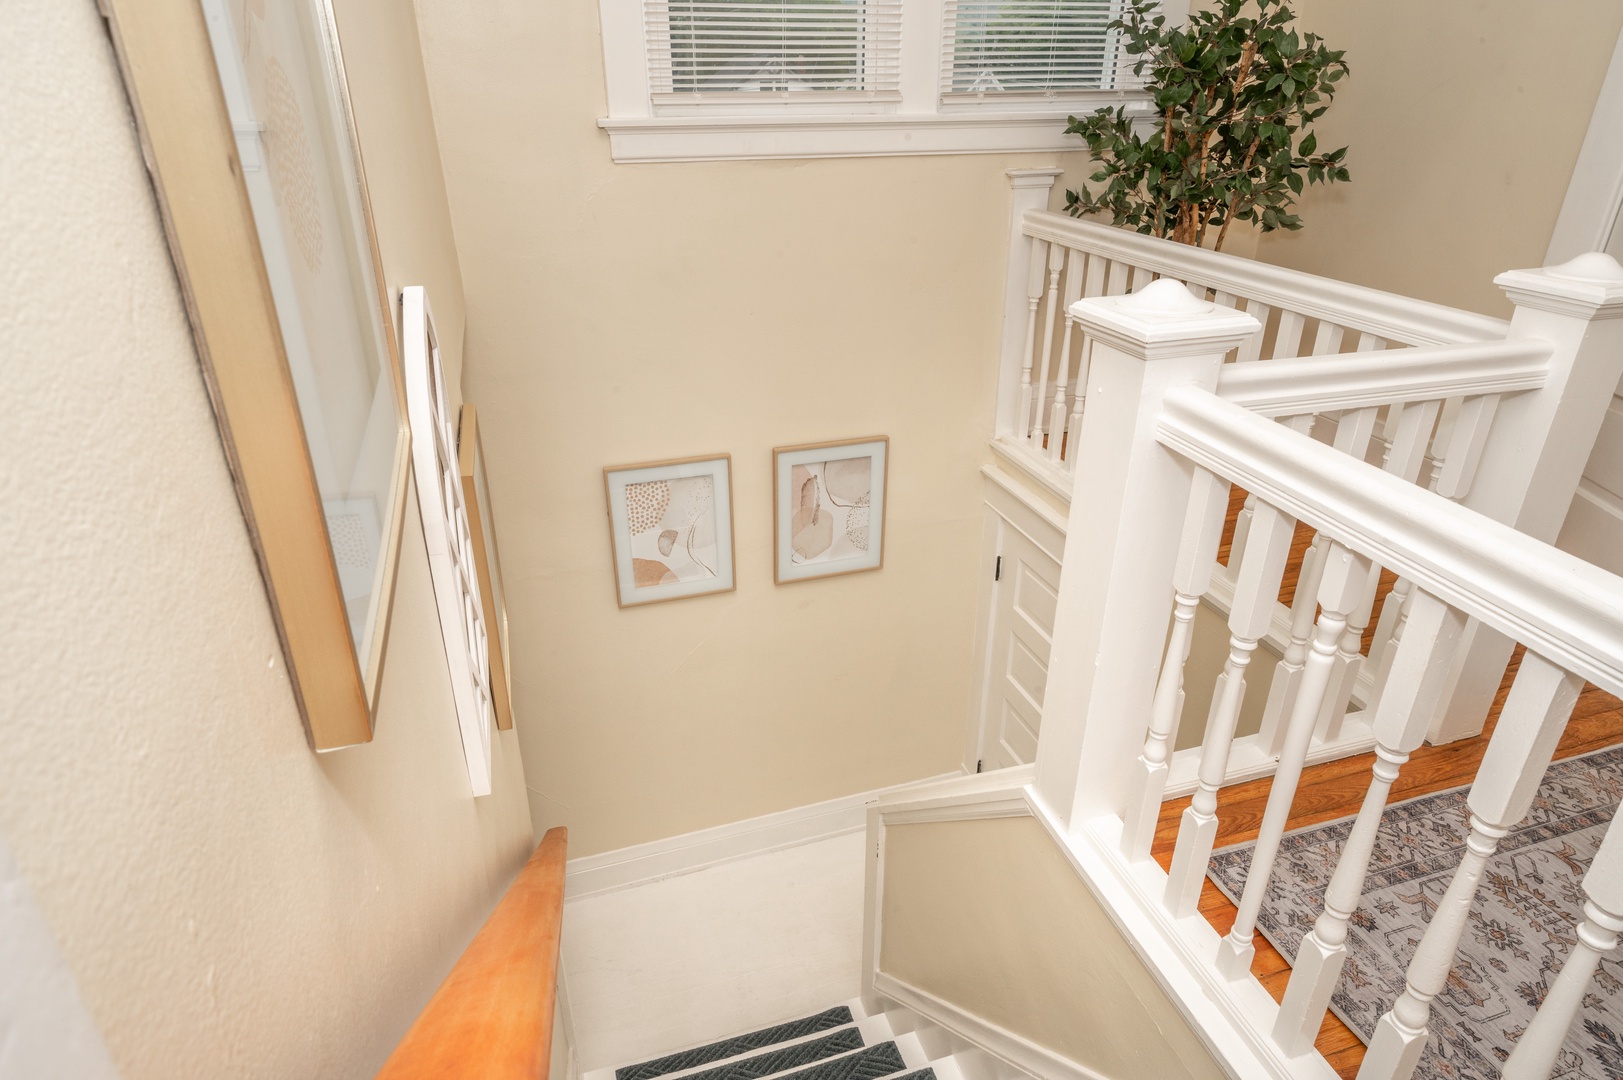 This home’s historic charm continues even throughout the staircase